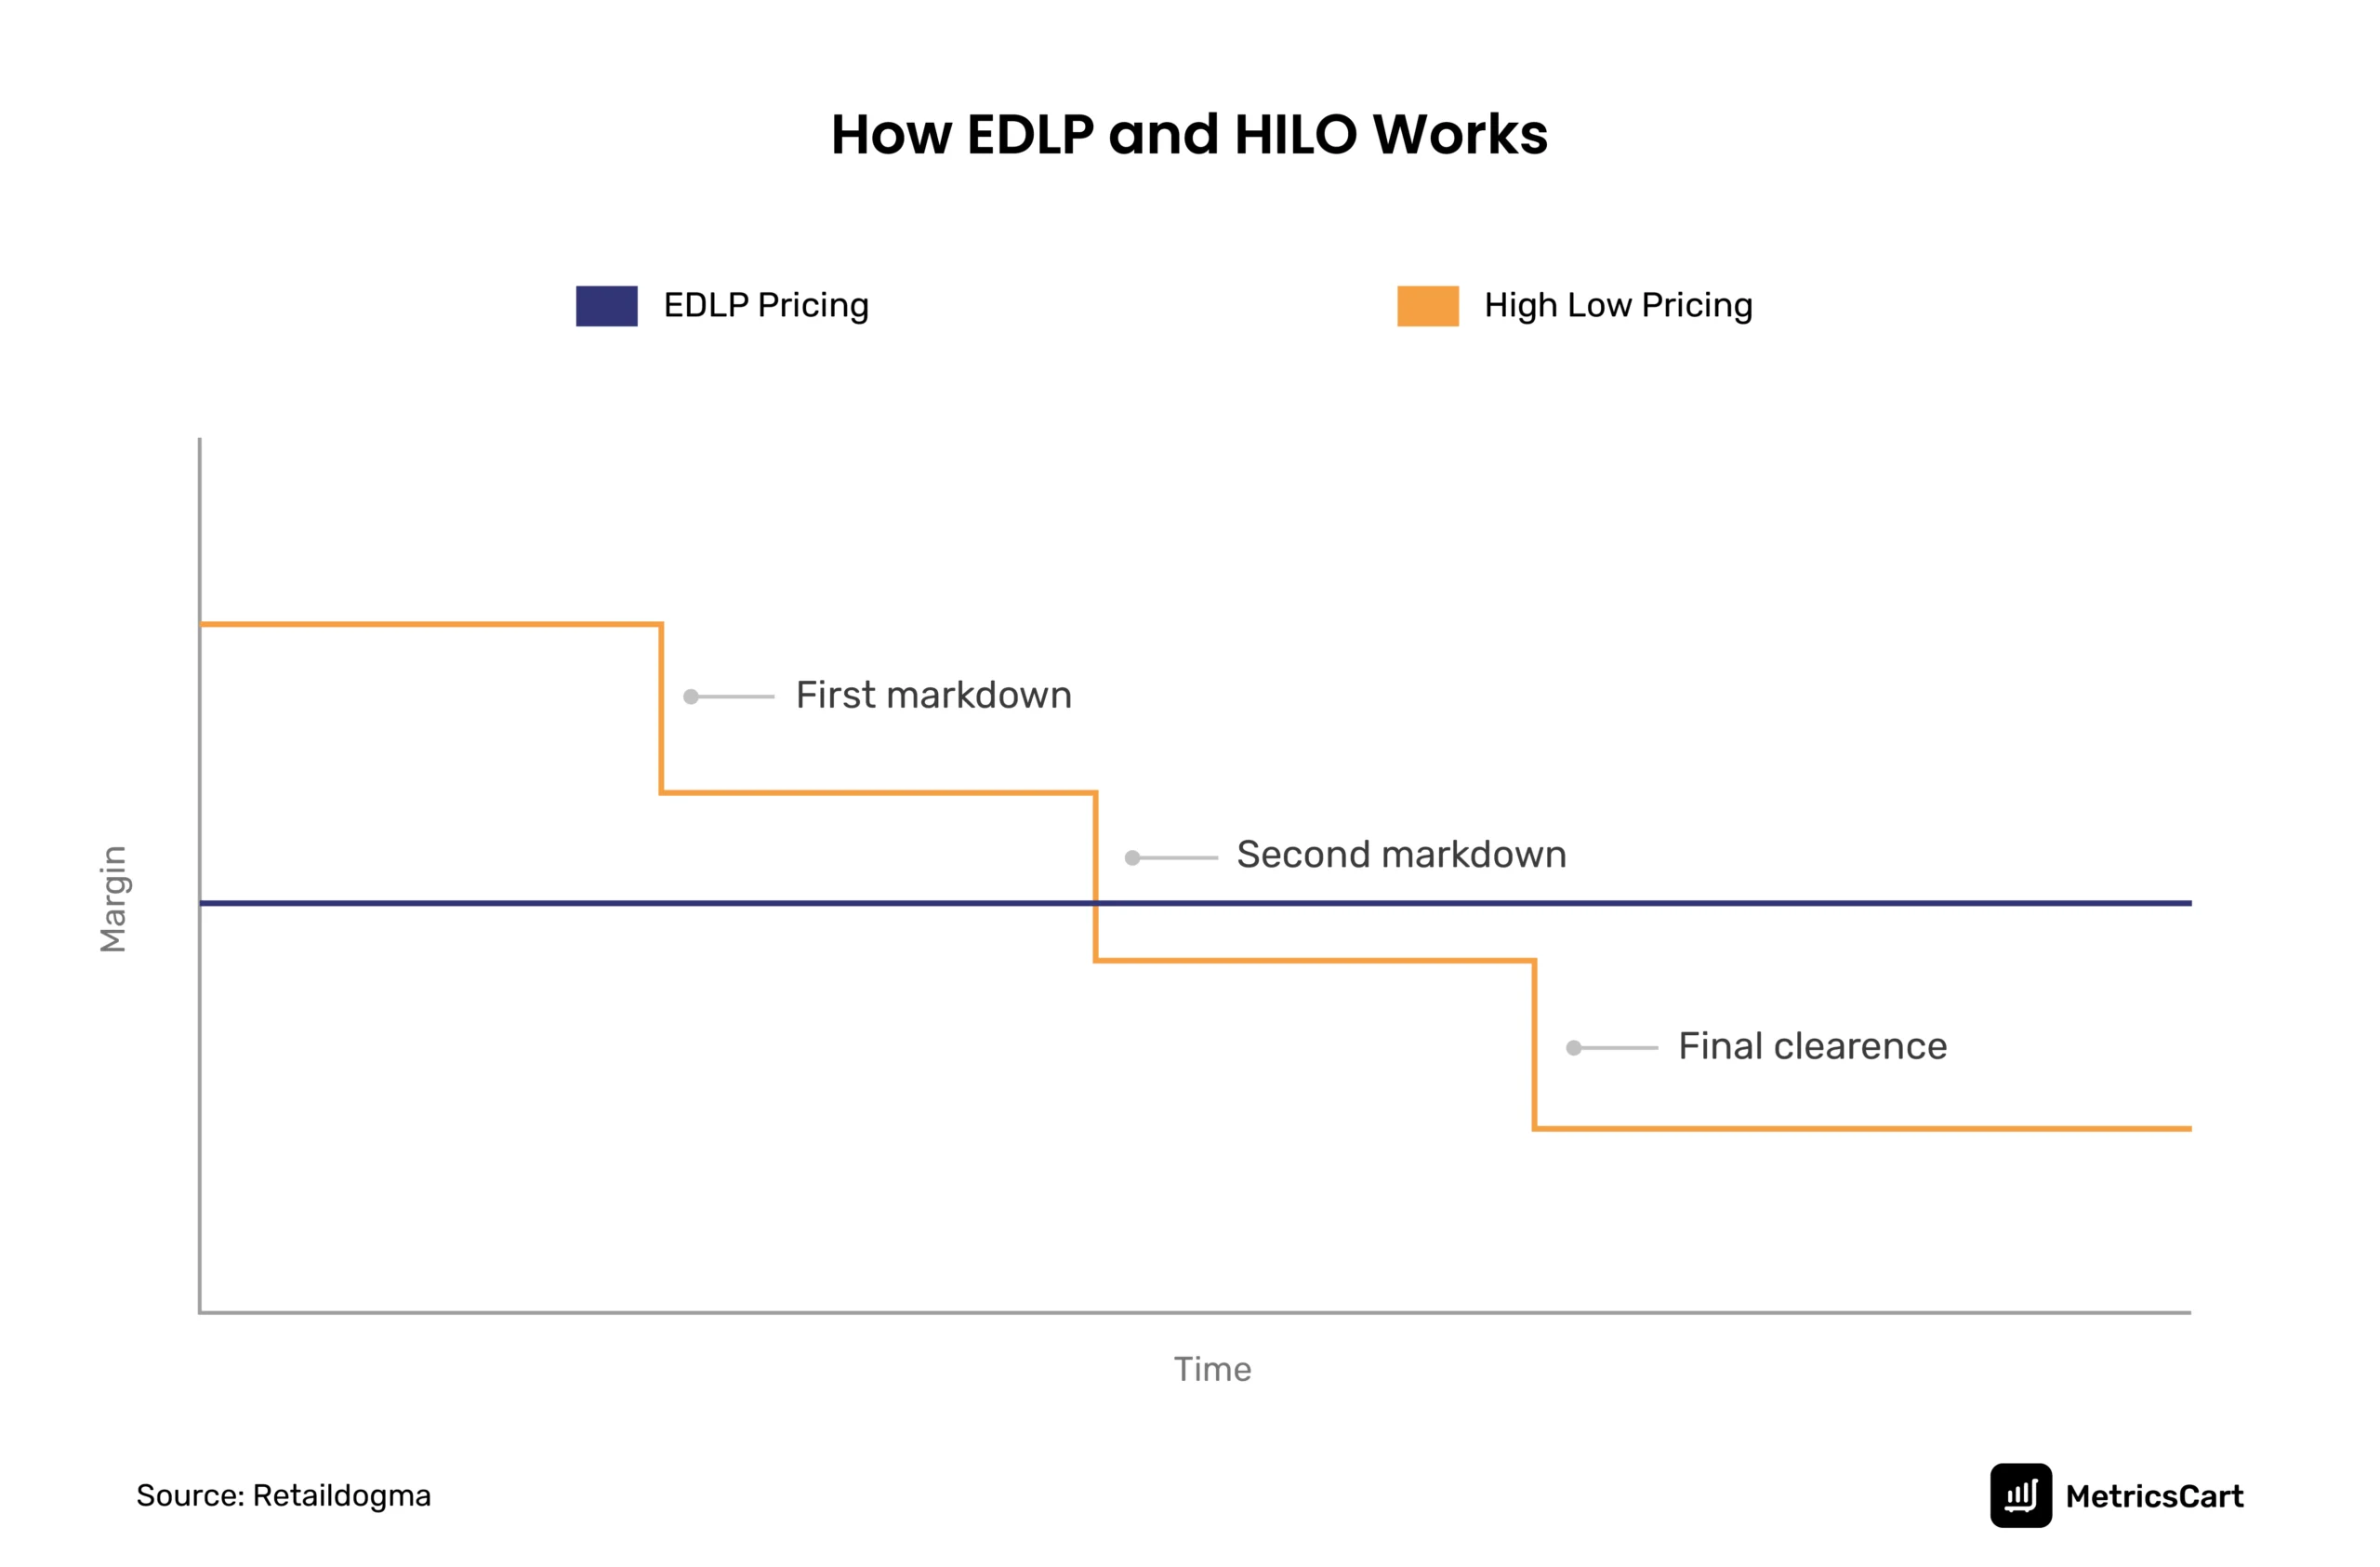 An illustrative model explaining the difference between EDLP and HILO pricing models.